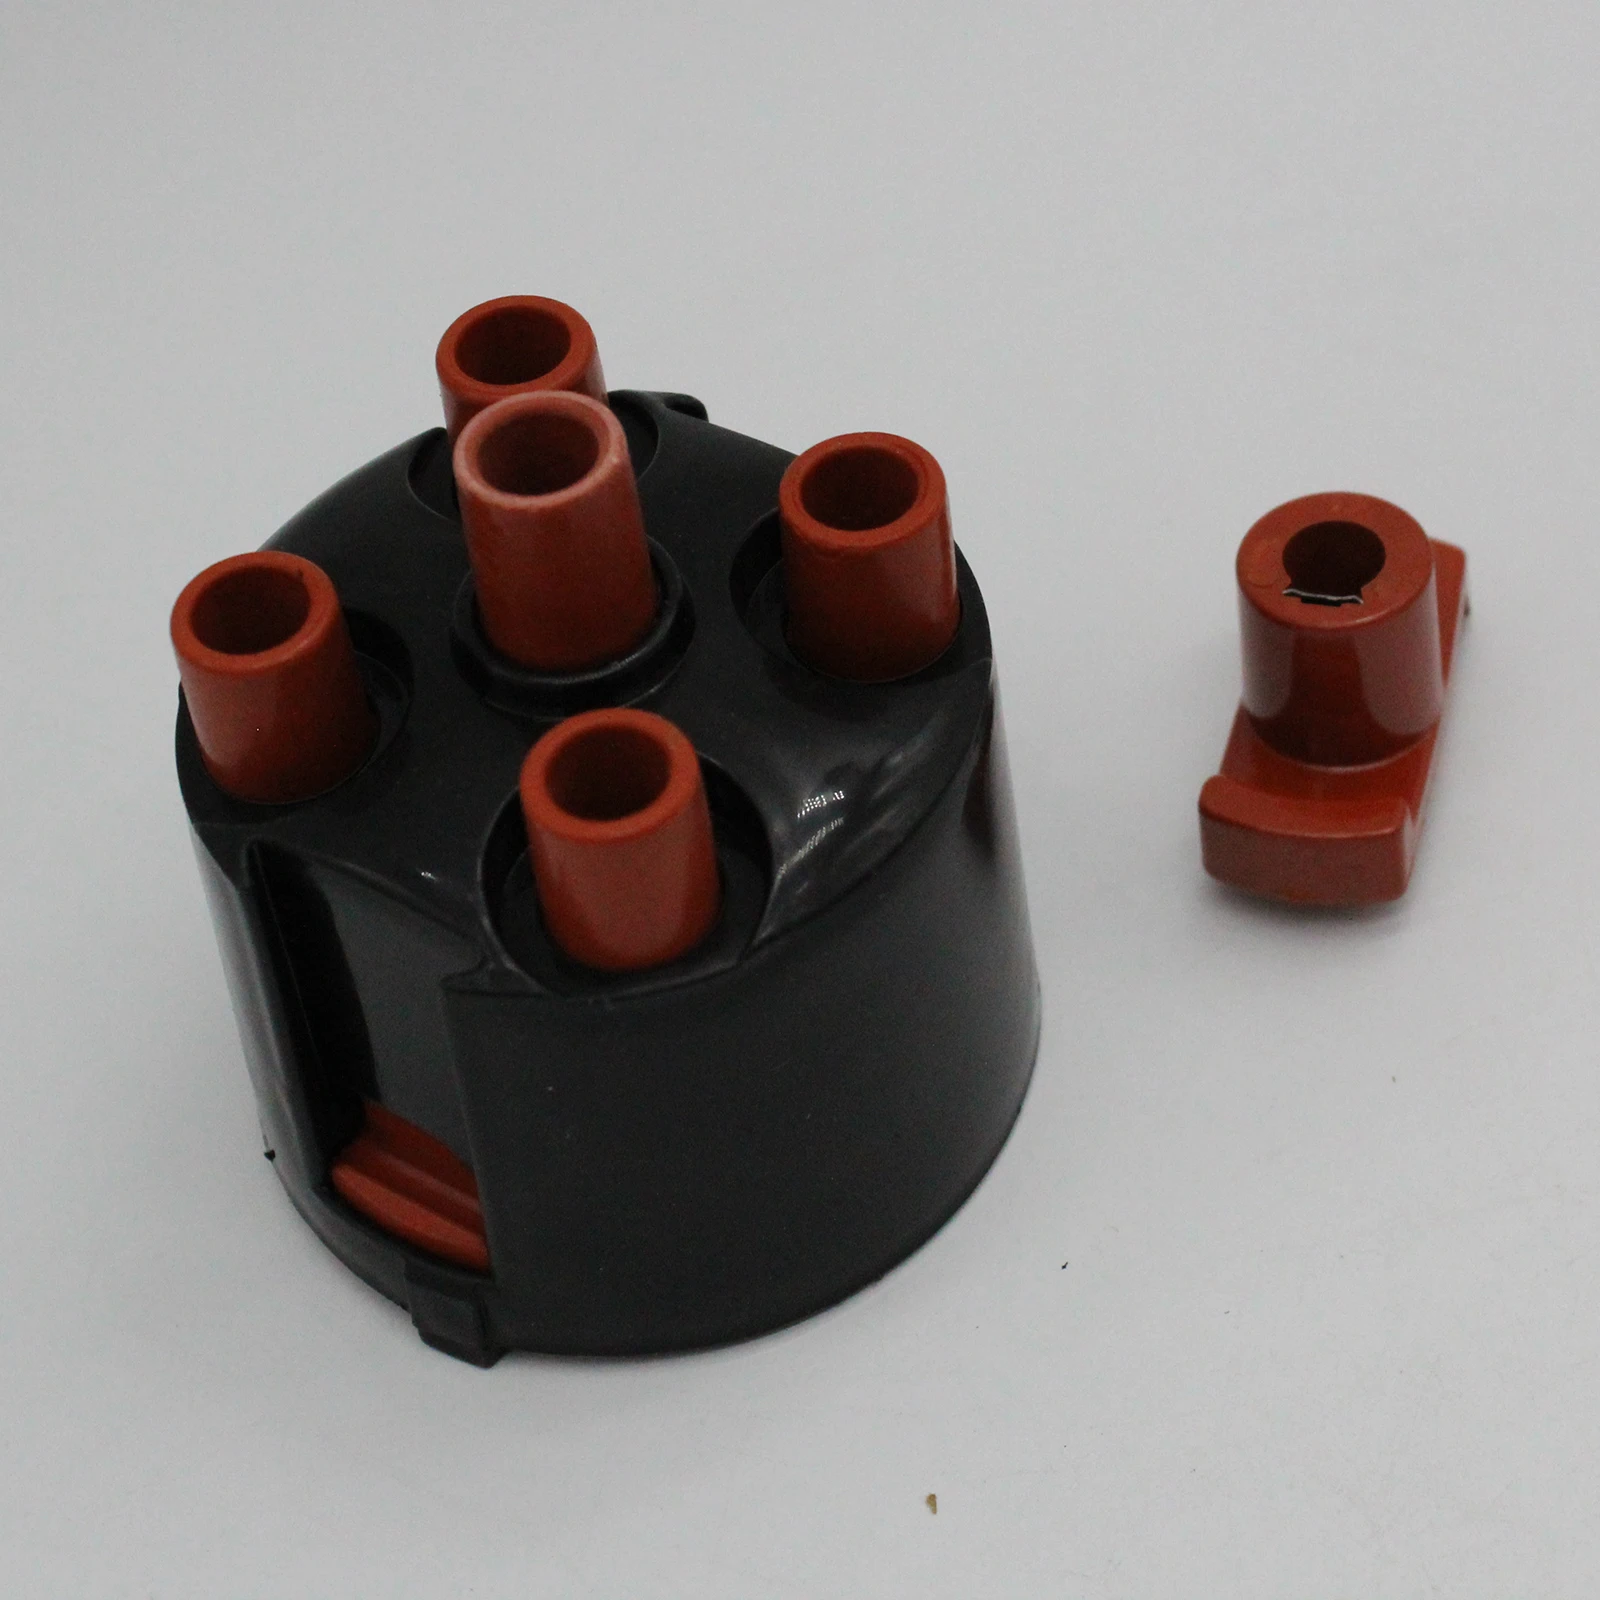 Easy to Install Car Auto Distributor Cap and Rotor Kit 8cm Fit for Golf